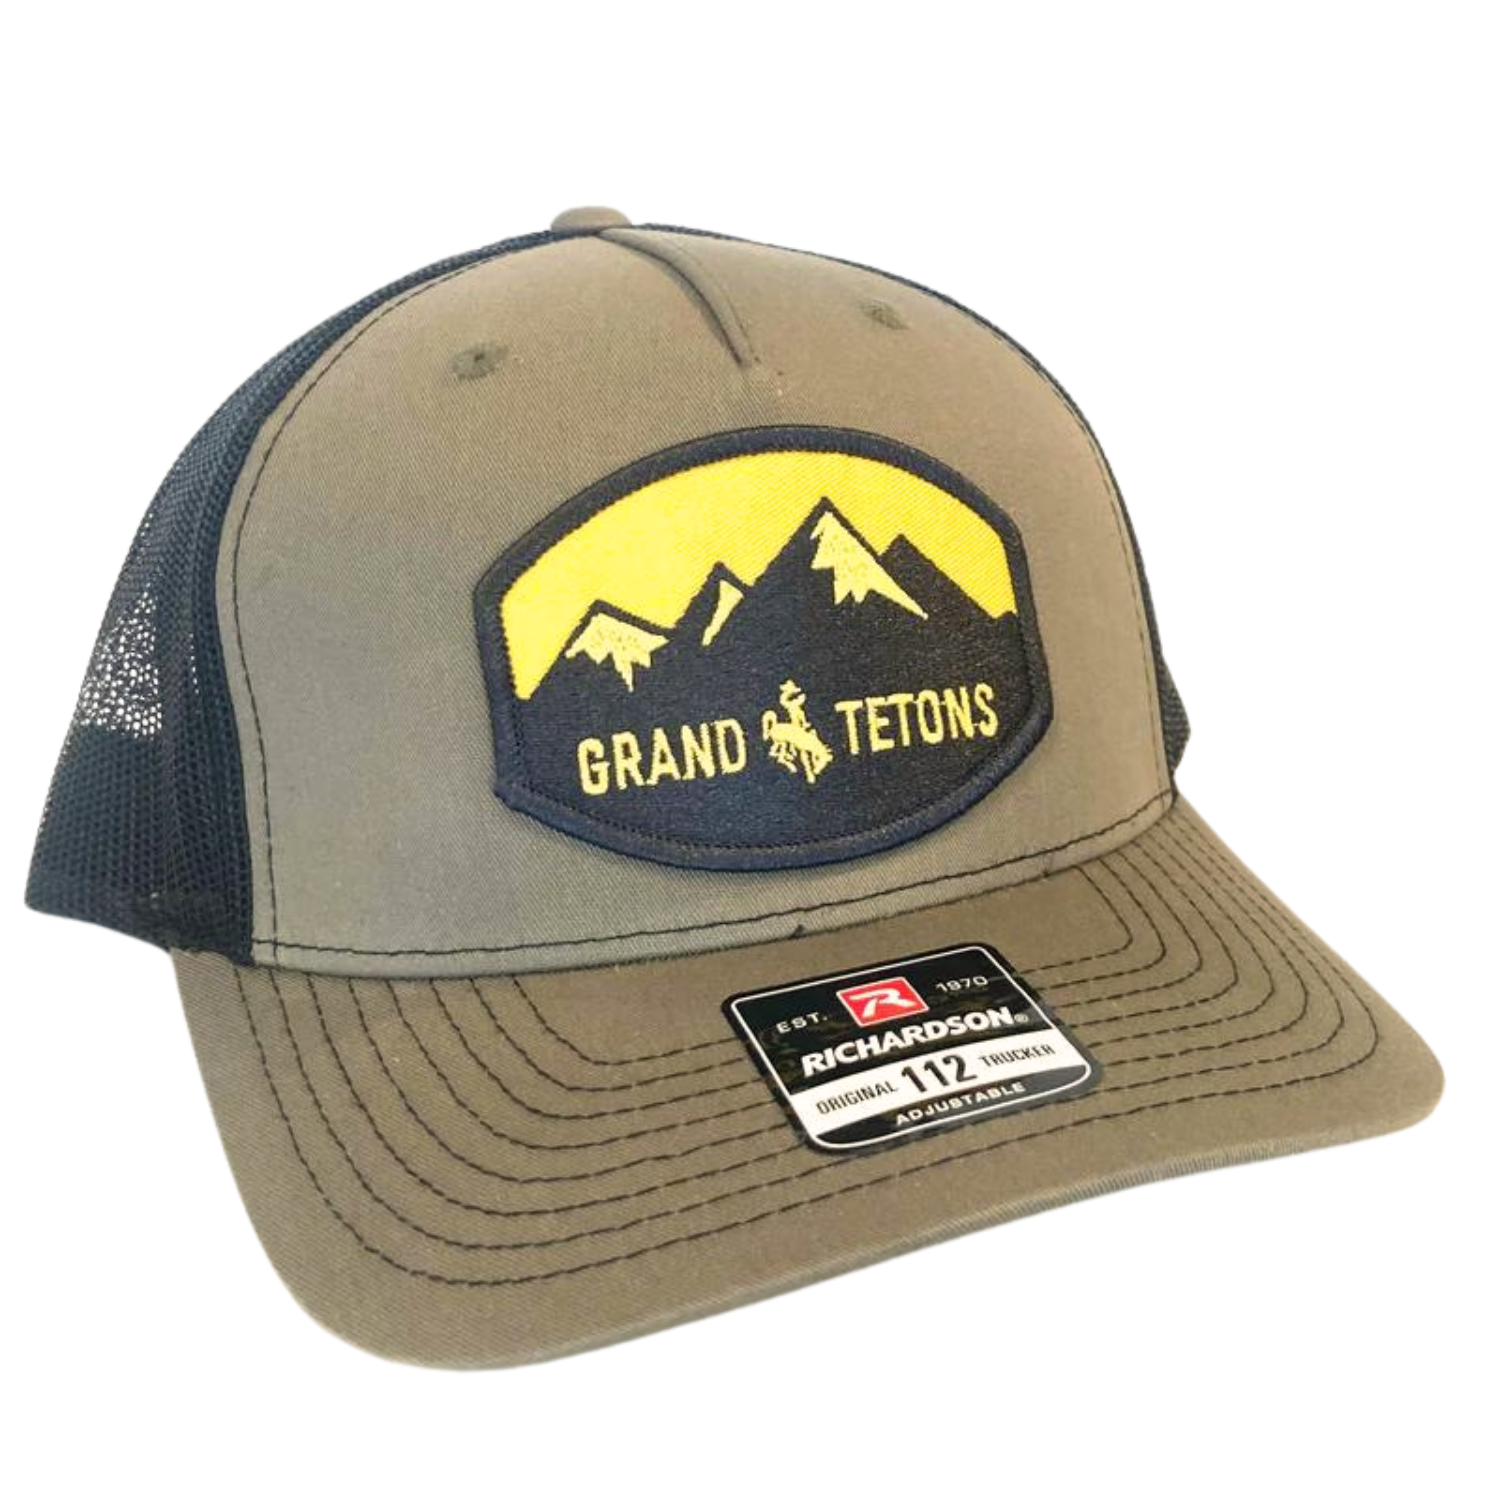 Moss Green Trucker Hat with Grand Teton yellow and brown Patch 